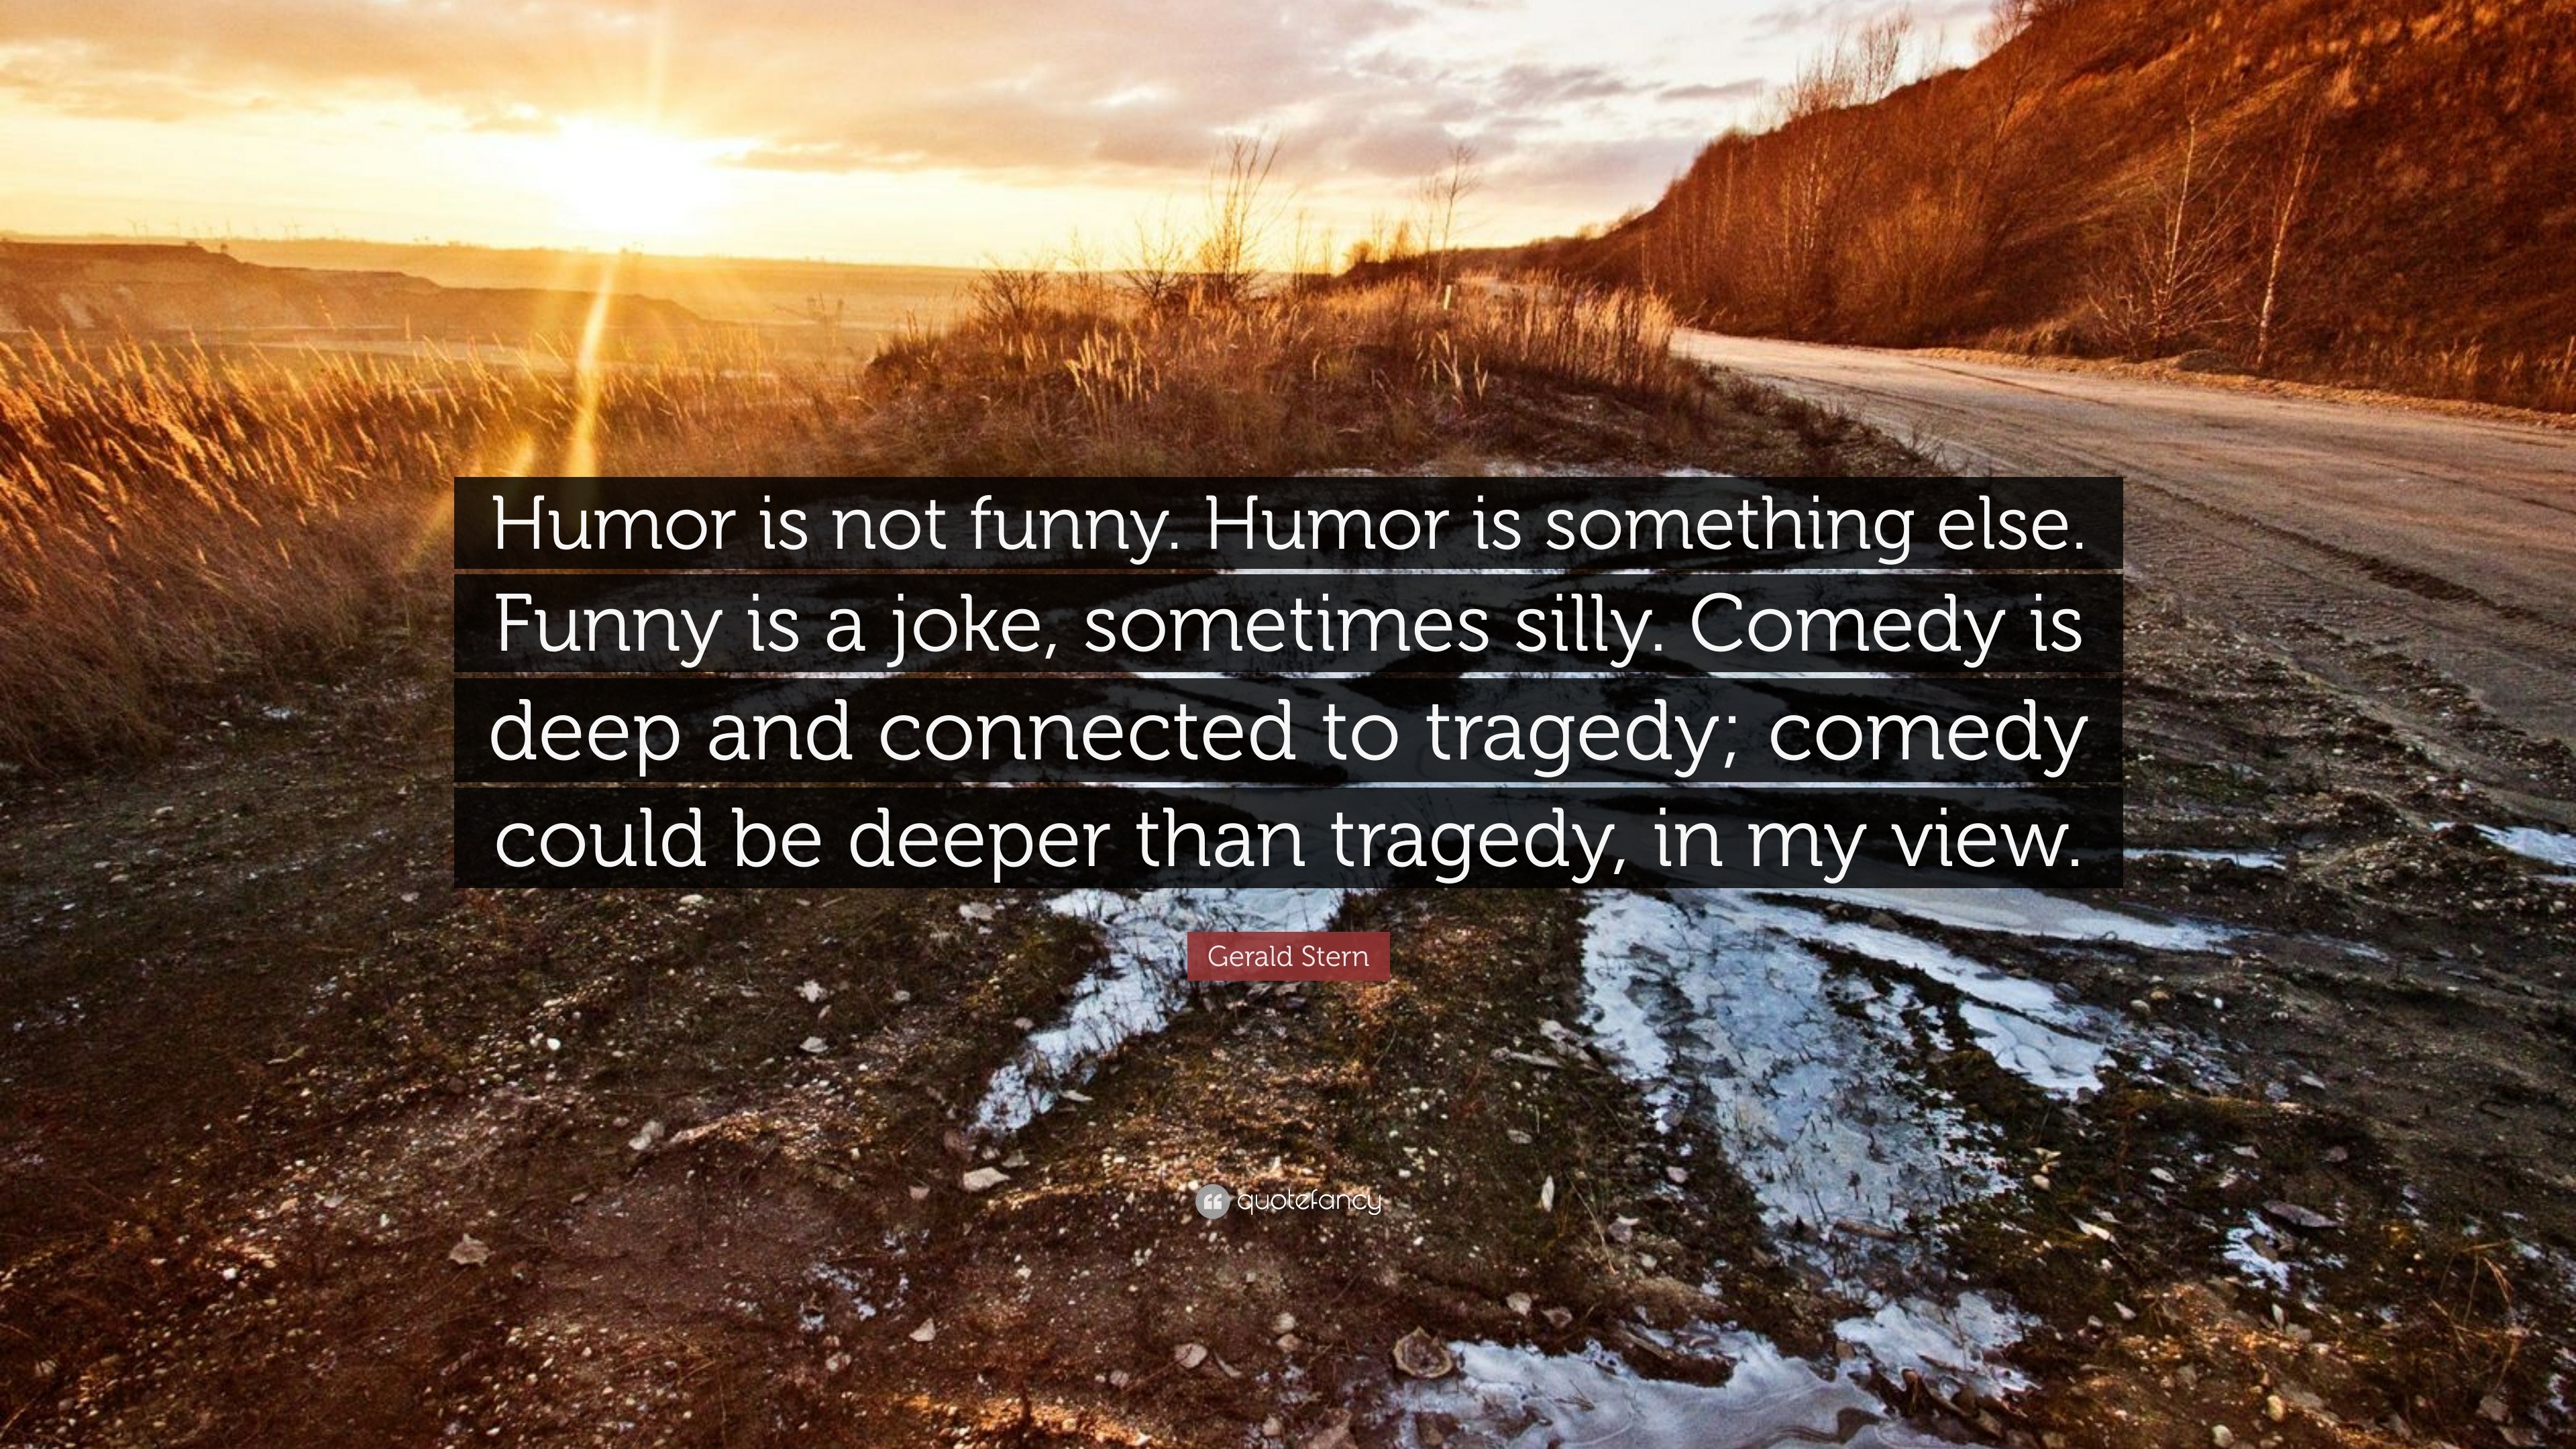 Gerald Stern Quote: “Humor is not funny. Humor is something else. Funny is  a joke, sometimes silly. Comedy is deep and connected to tragedy; ...”